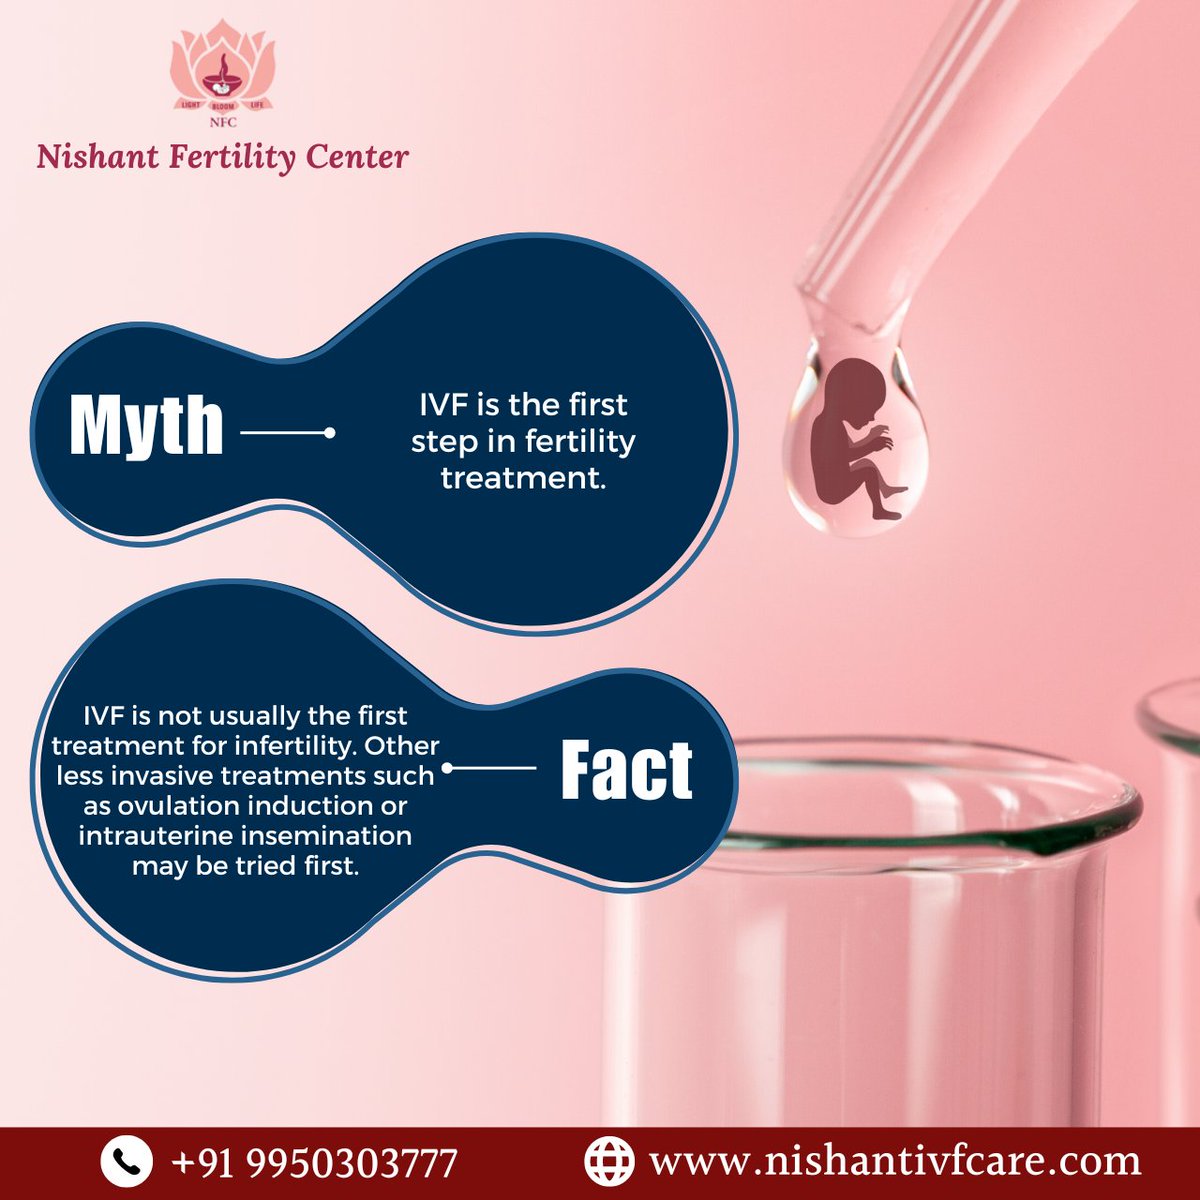 Dispelling myths about fertility treatments! Take the right step towards parenthood with expert guidance.
Call- +91 9950303777

#IVFMyths #FertilityFacts #FertilityTreatment #IVF #FertilityAwareness #ParenthoodJourney #InfertilityTreatment #jaipur #nishantfertilitycenterjaipur